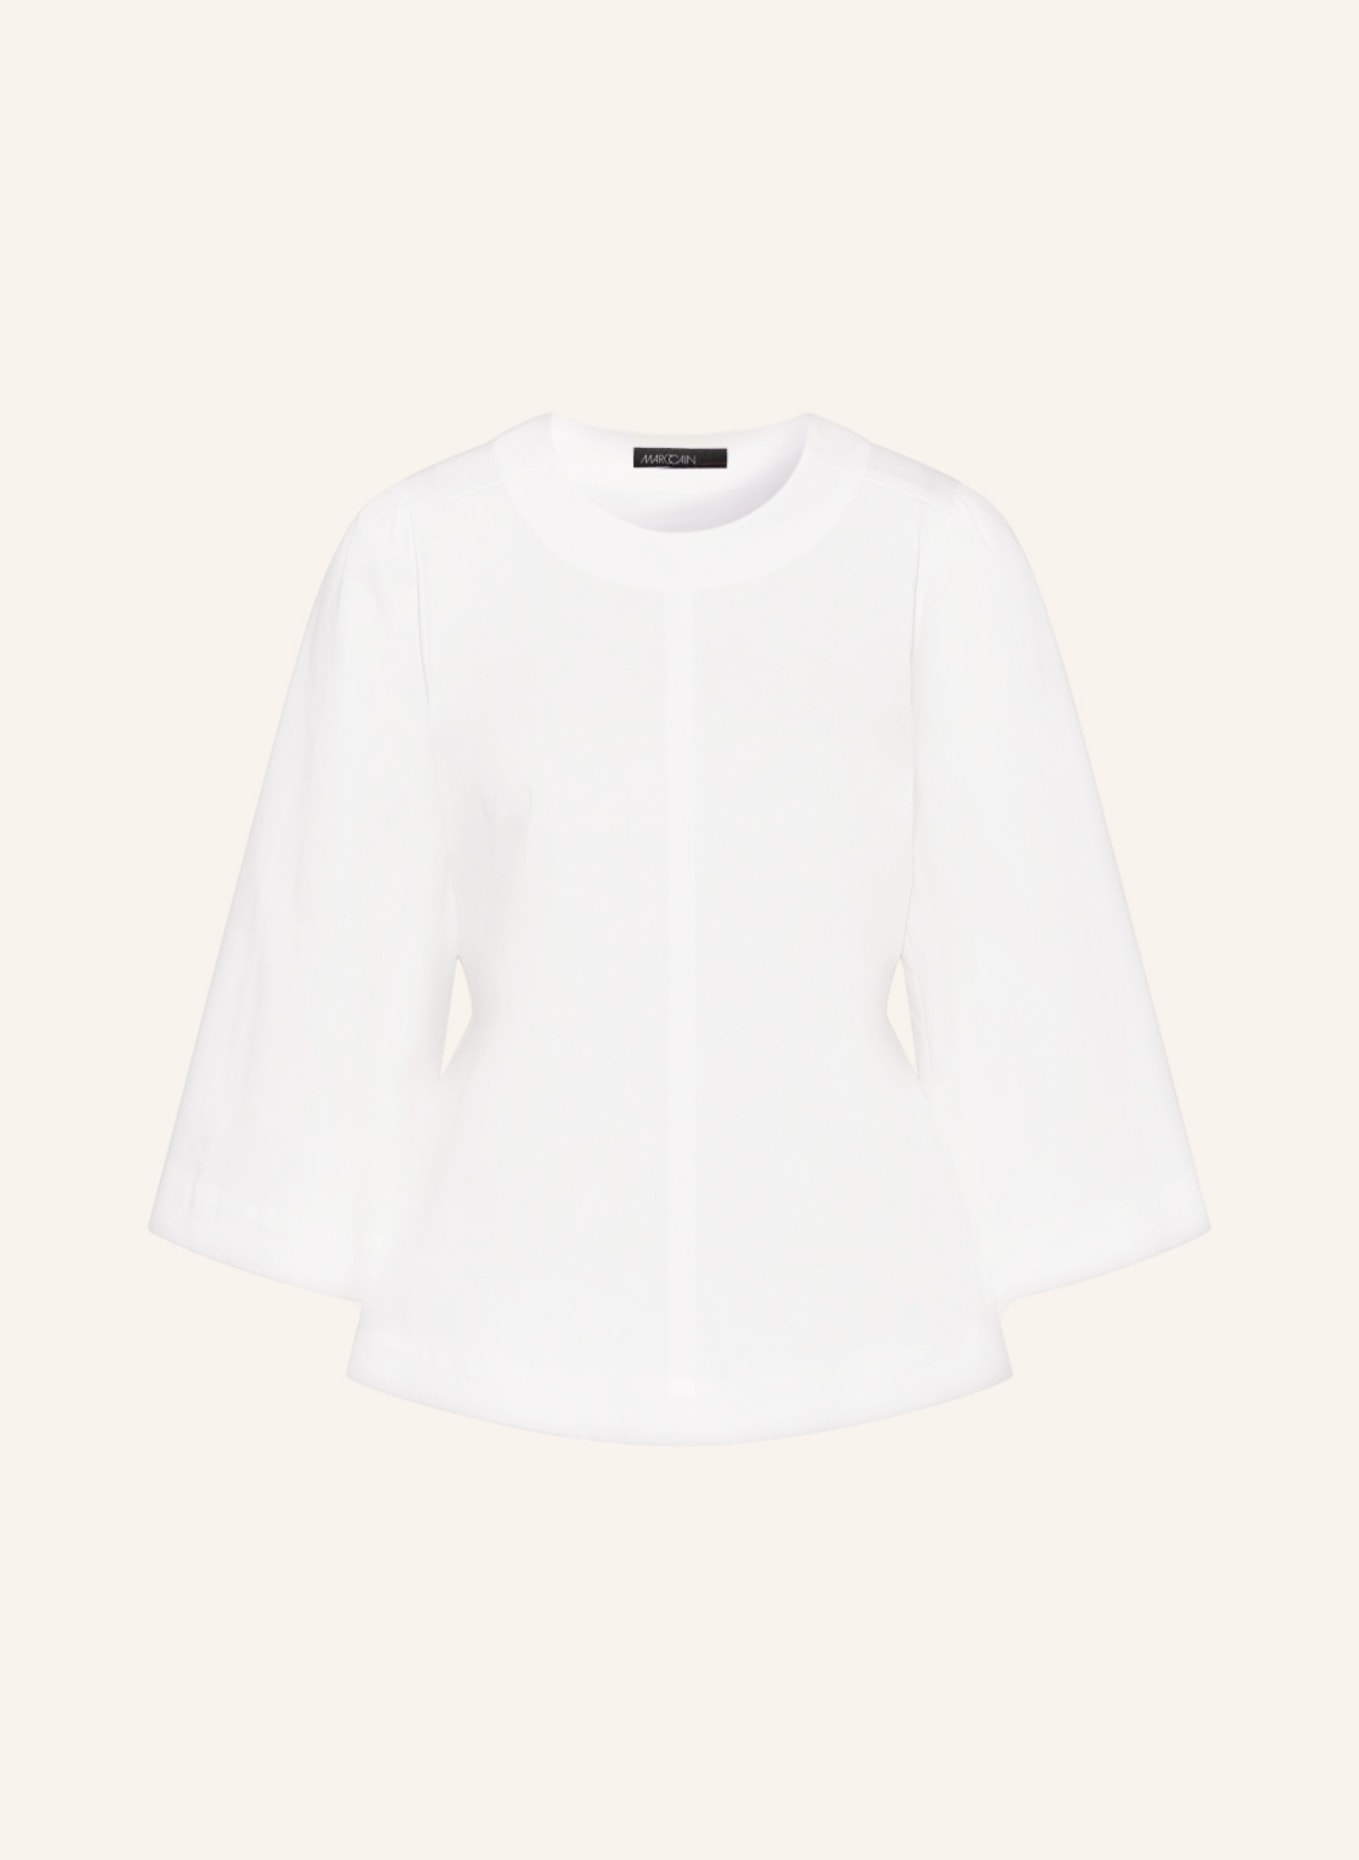 MARC CAIN Shirt blouse with 3/4 sleeves, Color: 110 off (Image 1)